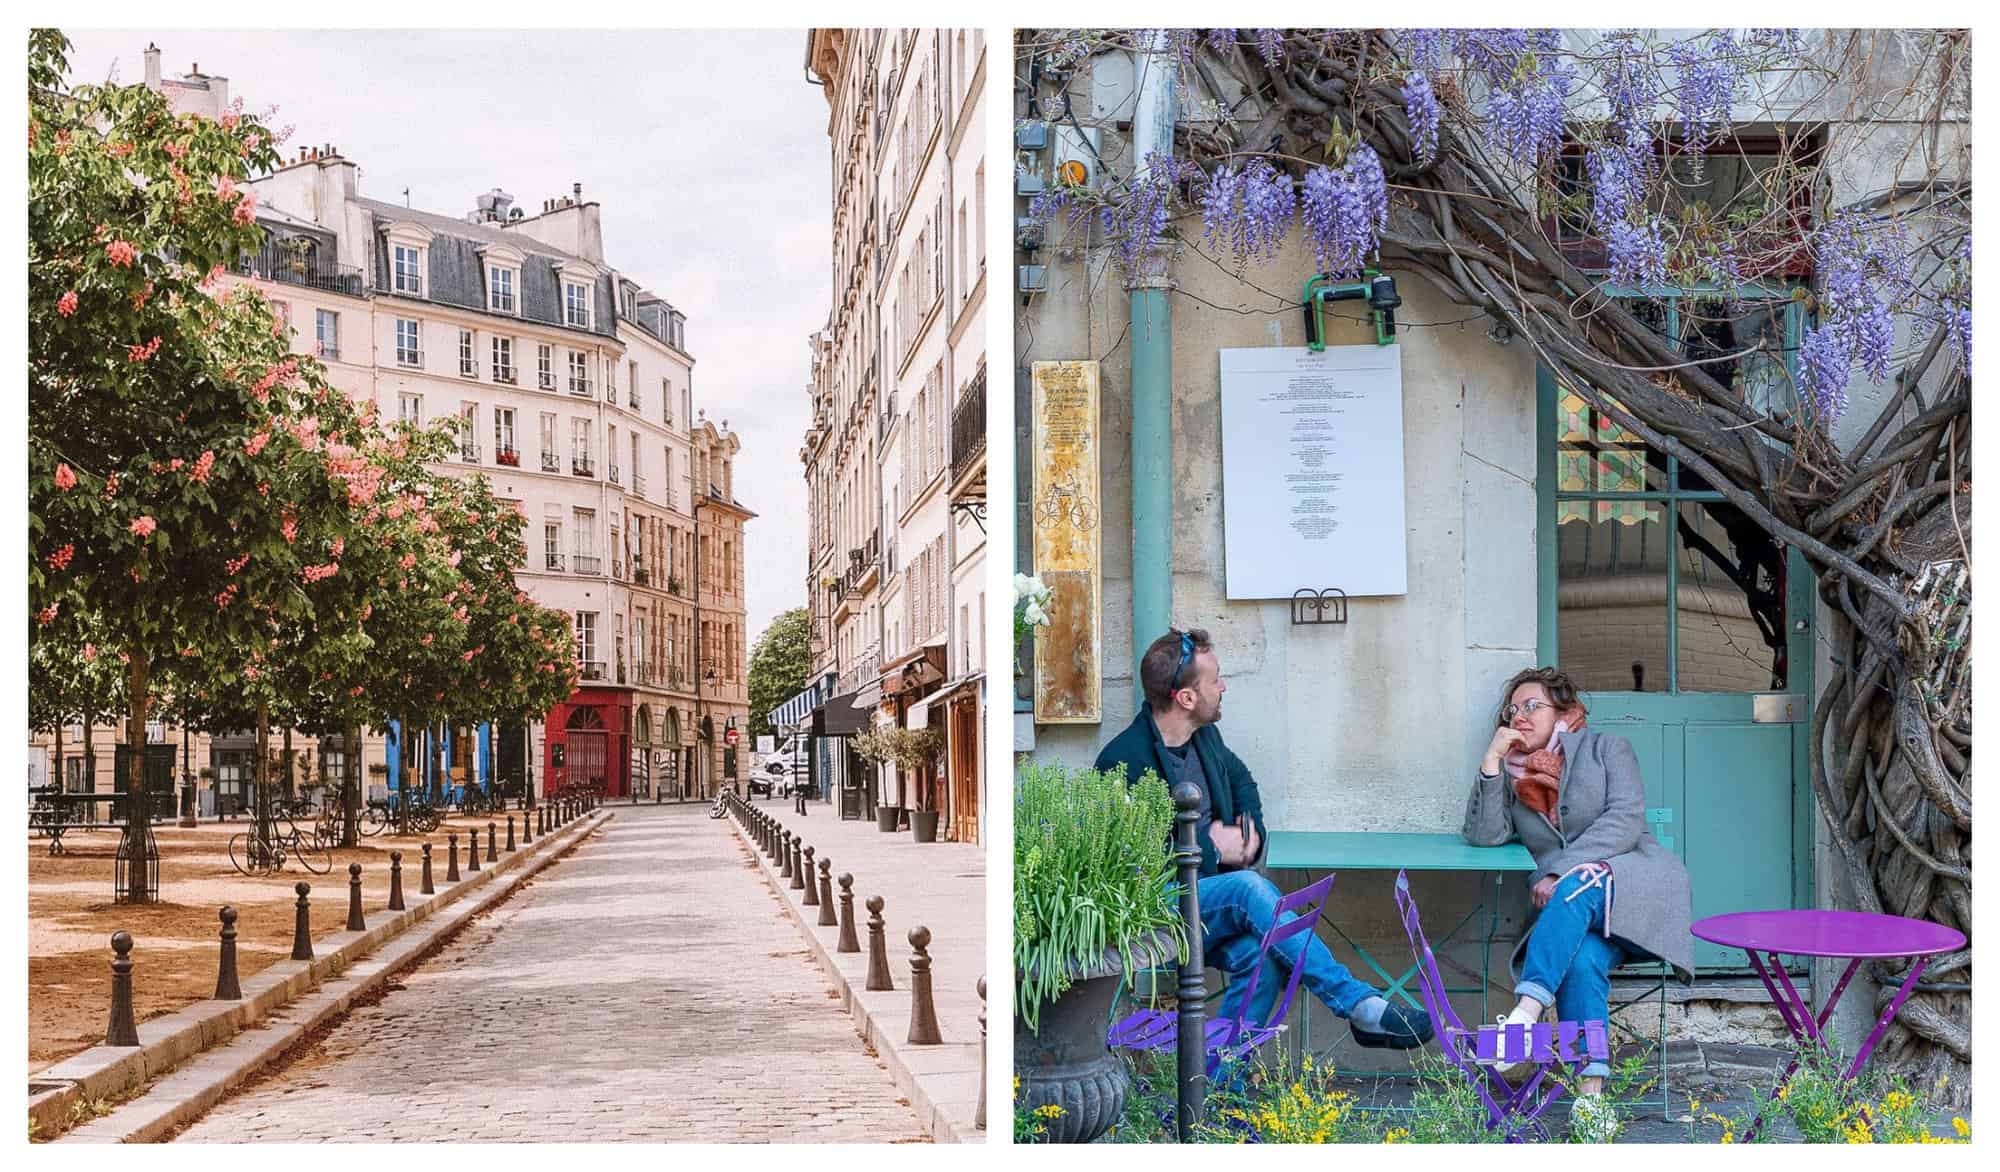 Left: A clear, long winding road at the side of Place Dauphine is adjacent to several independent shops. Right: A couple are sat in relaxed clothes, mid-conversation at a table outside Au Vieux Paris d'Arcole